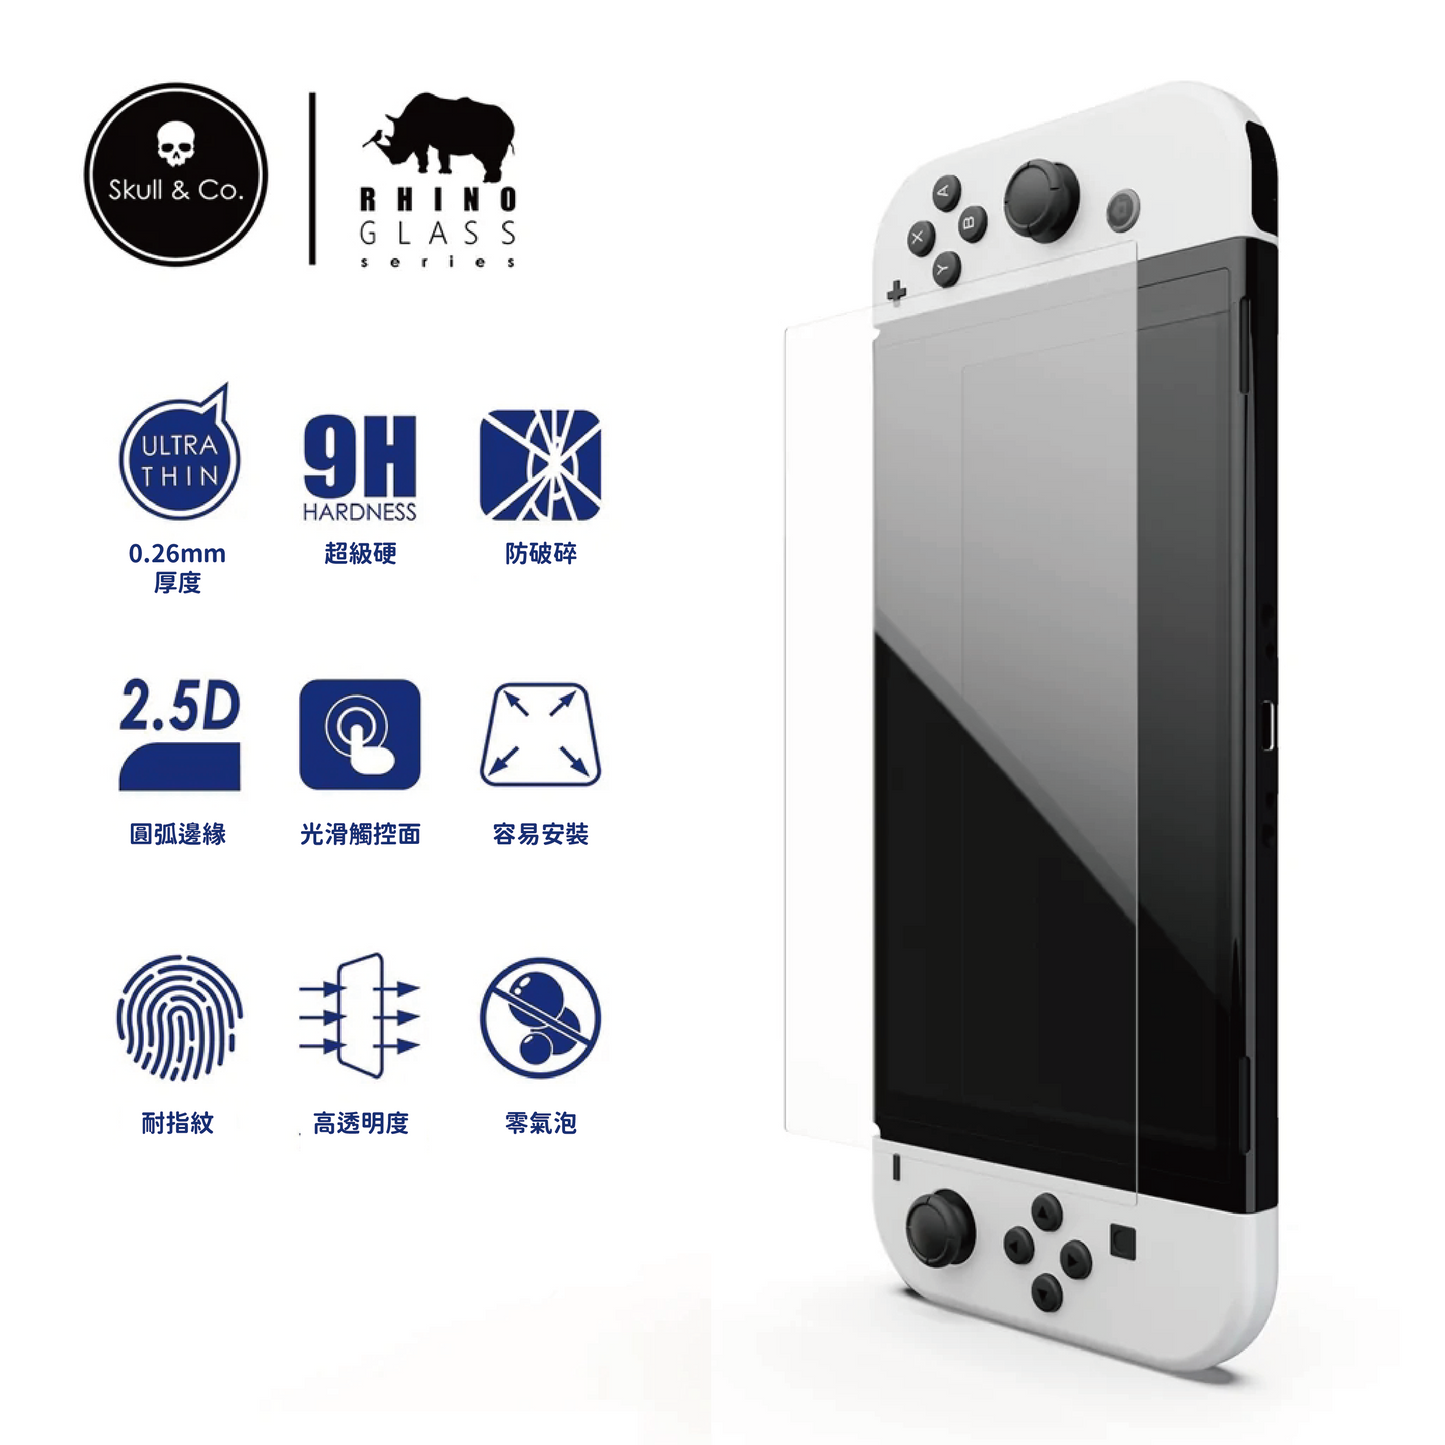 9H tempered glass protector pack of two pieces suitable for Switch original/electric version 